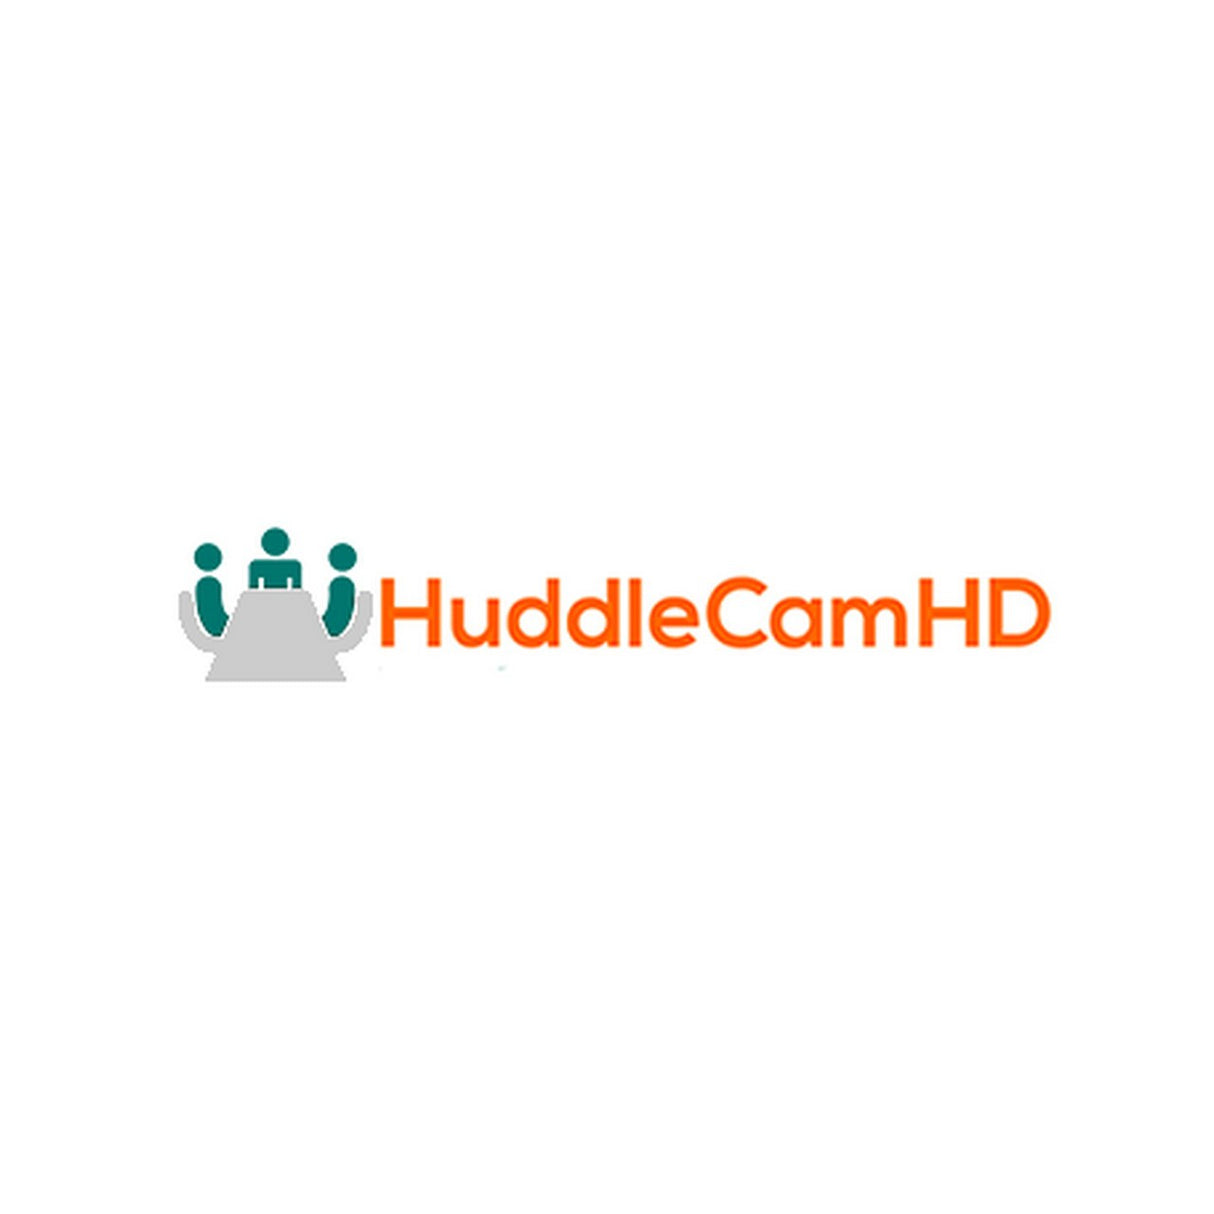 HuddleCamHD HCM-2-WH | Large Universal Wall Mount for PTZ 3X 10X Vaddio Sony Air Cameras White